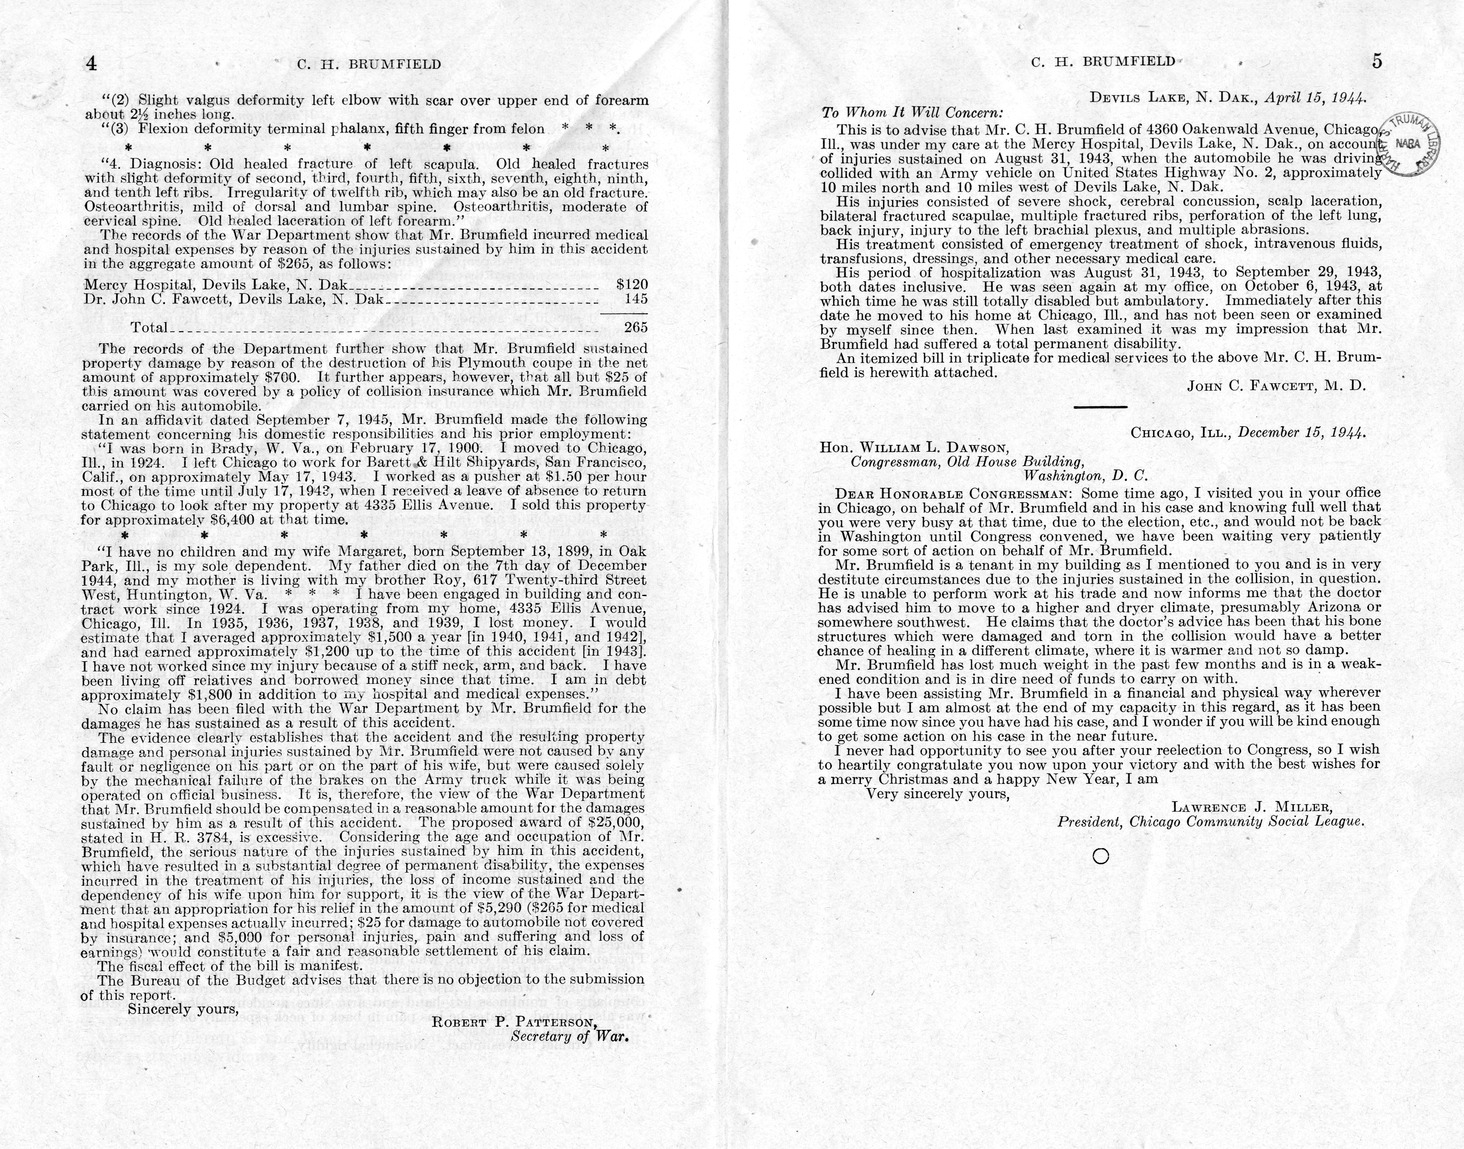 Memorandum from Frederick J. Bailey to M. C. Latta, H. R. 3784, For the Relief of C. H. Brumfield, with Attachments